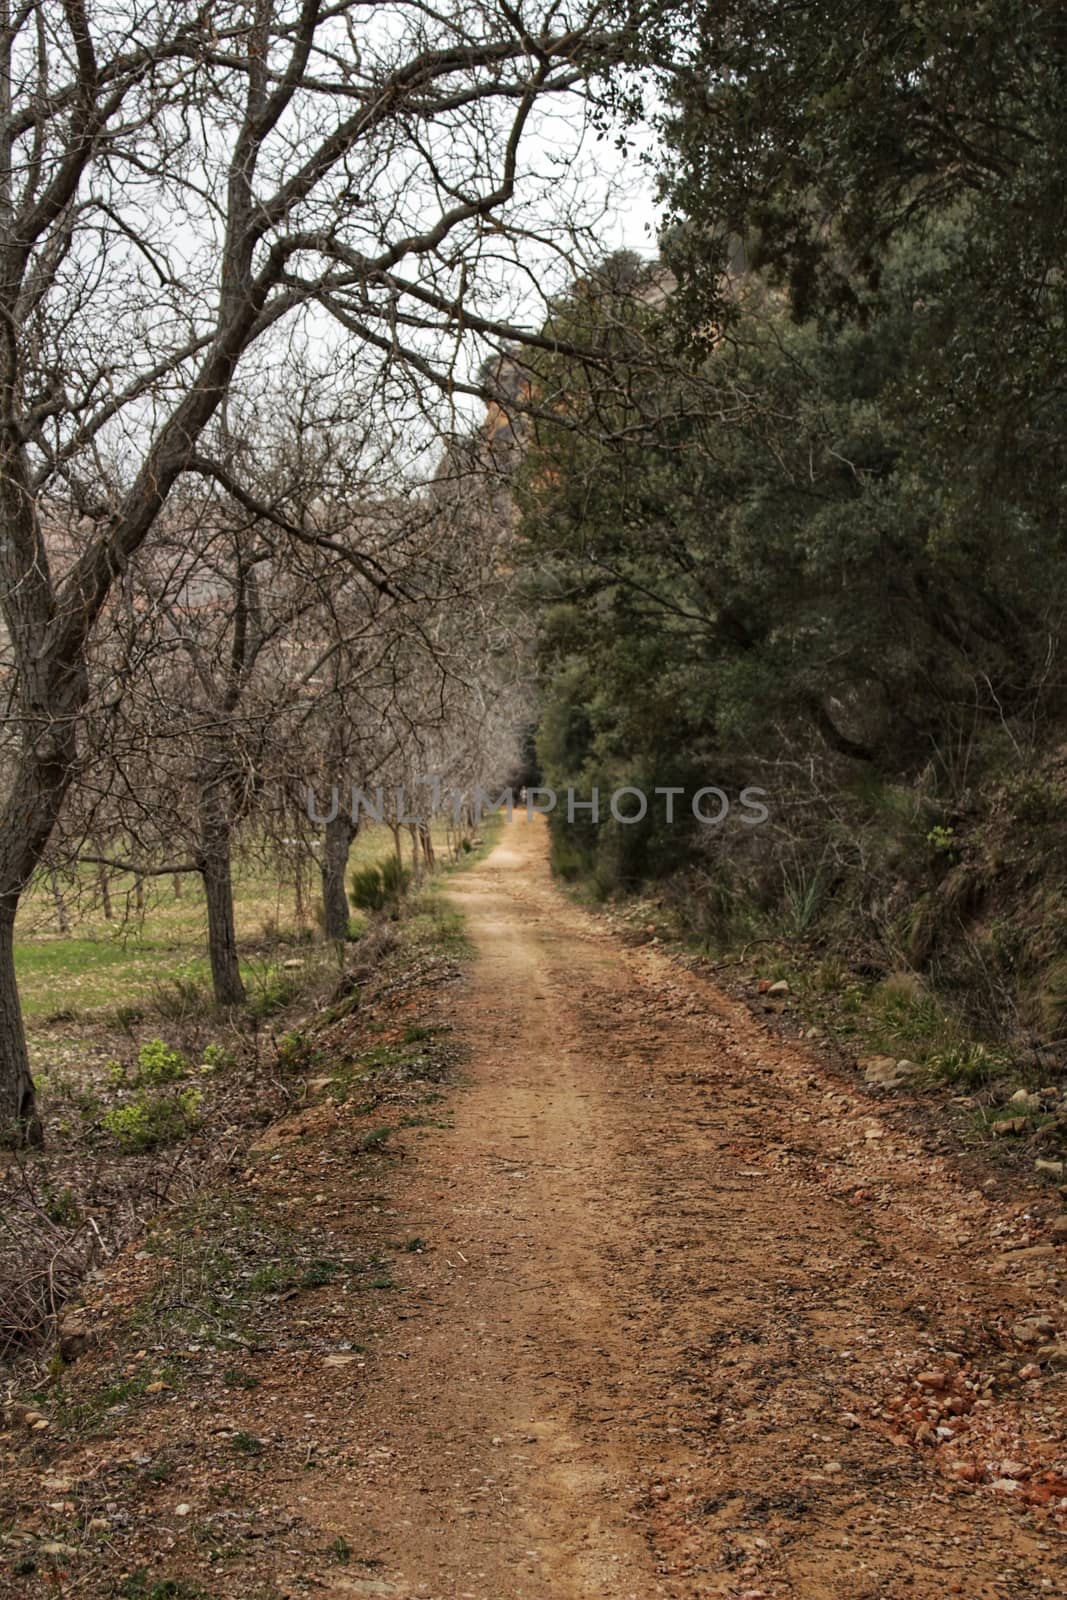 Mountain landscape and path between green vegetation in spring by soniabonet